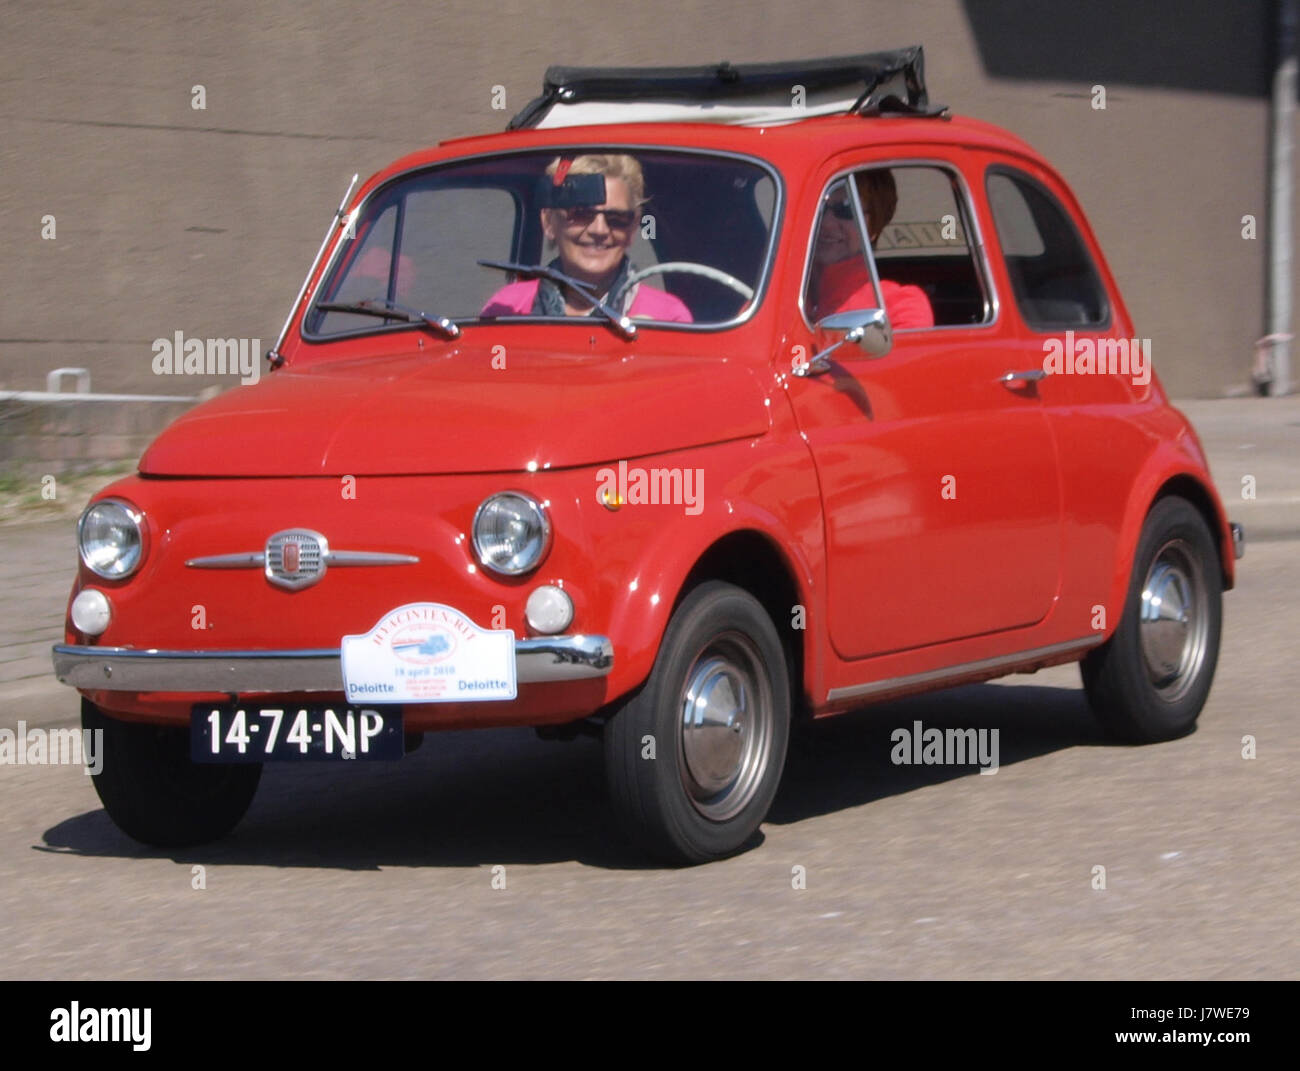 1970 Fiat , Dutch licence registration 14 74 NP, pic1 Stock Photo